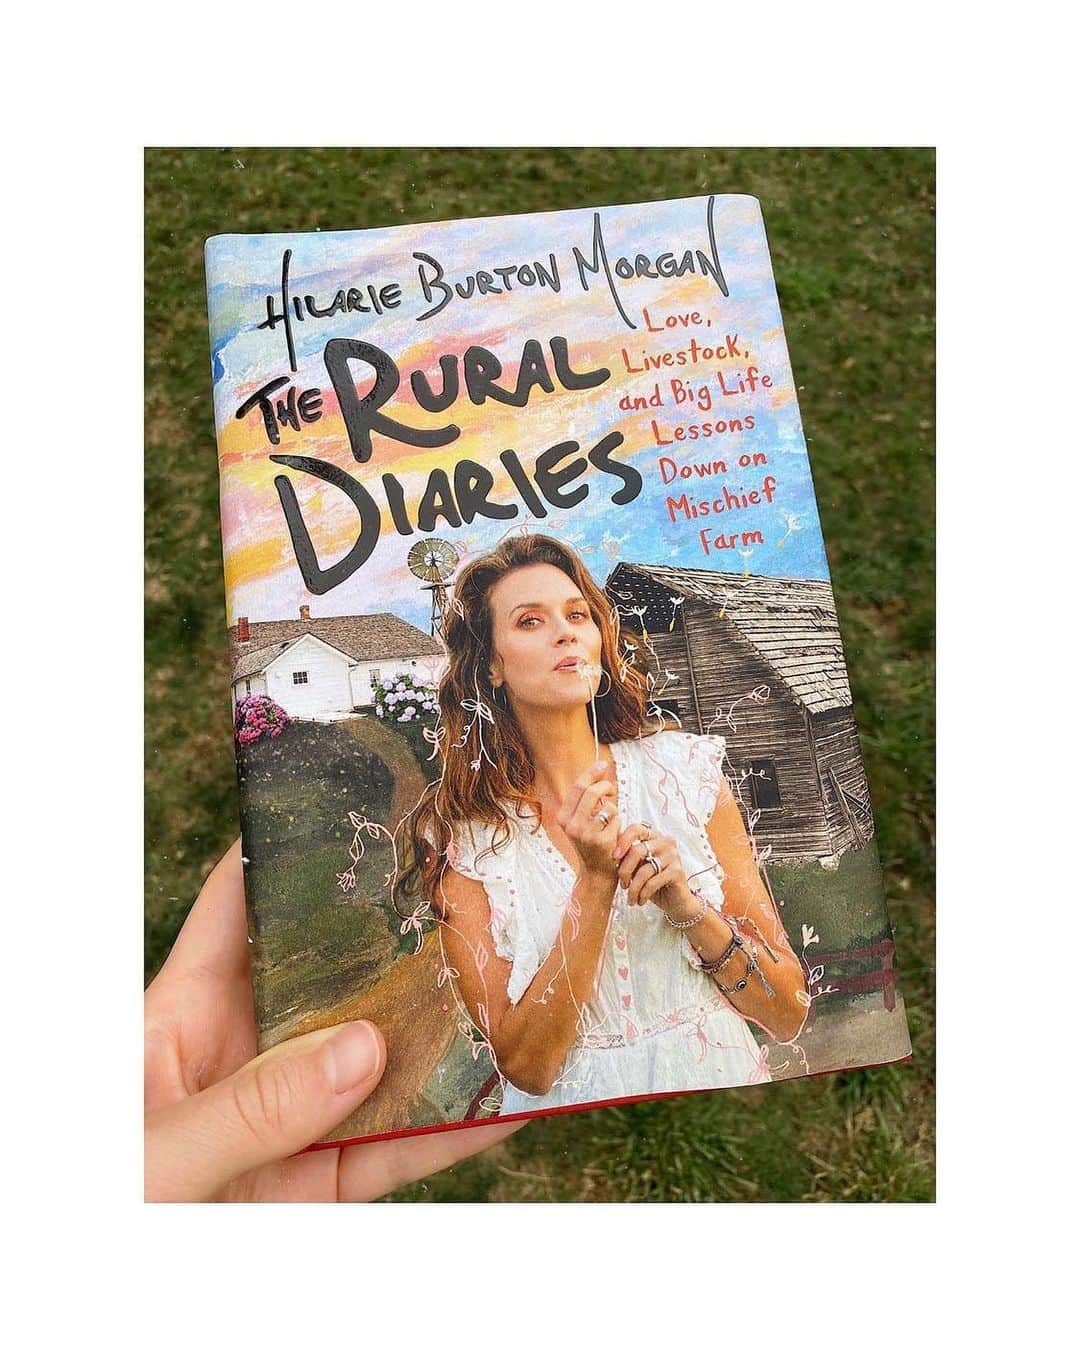 メリル・デイヴィスのインスタグラム：「Happy Tuesday, all & hope you had a nice long weekend. Excited to share this week's virtual “little neighborhood library” book: "The Rural Diaries" by Hilarie Burton Morgan. This is a book I had heard great things about for a while & was grateful when someone reminded me about it when I asked for recommendations recently. Not only did I enjoy the book immensely, but I also felt it was a great time to dive into Hilarie's thoughtful, honest & raw story. So many of us are examining our own lives through different lenses right now. Covid has shaken us, forced us to get creative, & think about what matters, what we really want &, perhaps, inspired us to make changes in our circumstances, goals, &/or daily routines. Maybe your perspective on work/life balance has changed? Maybe you're making a leap & moving closer to family or deep into the woods somewhere? As someone who has always dreamed of country living, I very much appreciated Hilarie's insight as she detailed her difficult, yet rewarding transition into a new way of life. --- As always, I’ll ship via USPS to the first person to DM me (limited to continental US shipping addresses). Once you’ve read the book at your leisure, please write a little note inside & pass along to a friend, asking them to do the same - using USPS whenever possible please.  --- Happy reading, happy sharing & thanks so much for participating!! Lastly, please keep sending me your recommendations! 😊📚✨ P.S. I am currently leaving packages for a few days before opening them & wiping anything/everything down with disinfecting wipes before bringing into my home. Use your discretion. #bookstagram #bookrecommendations #booklover #booknerd #bookaddict #bookshare」